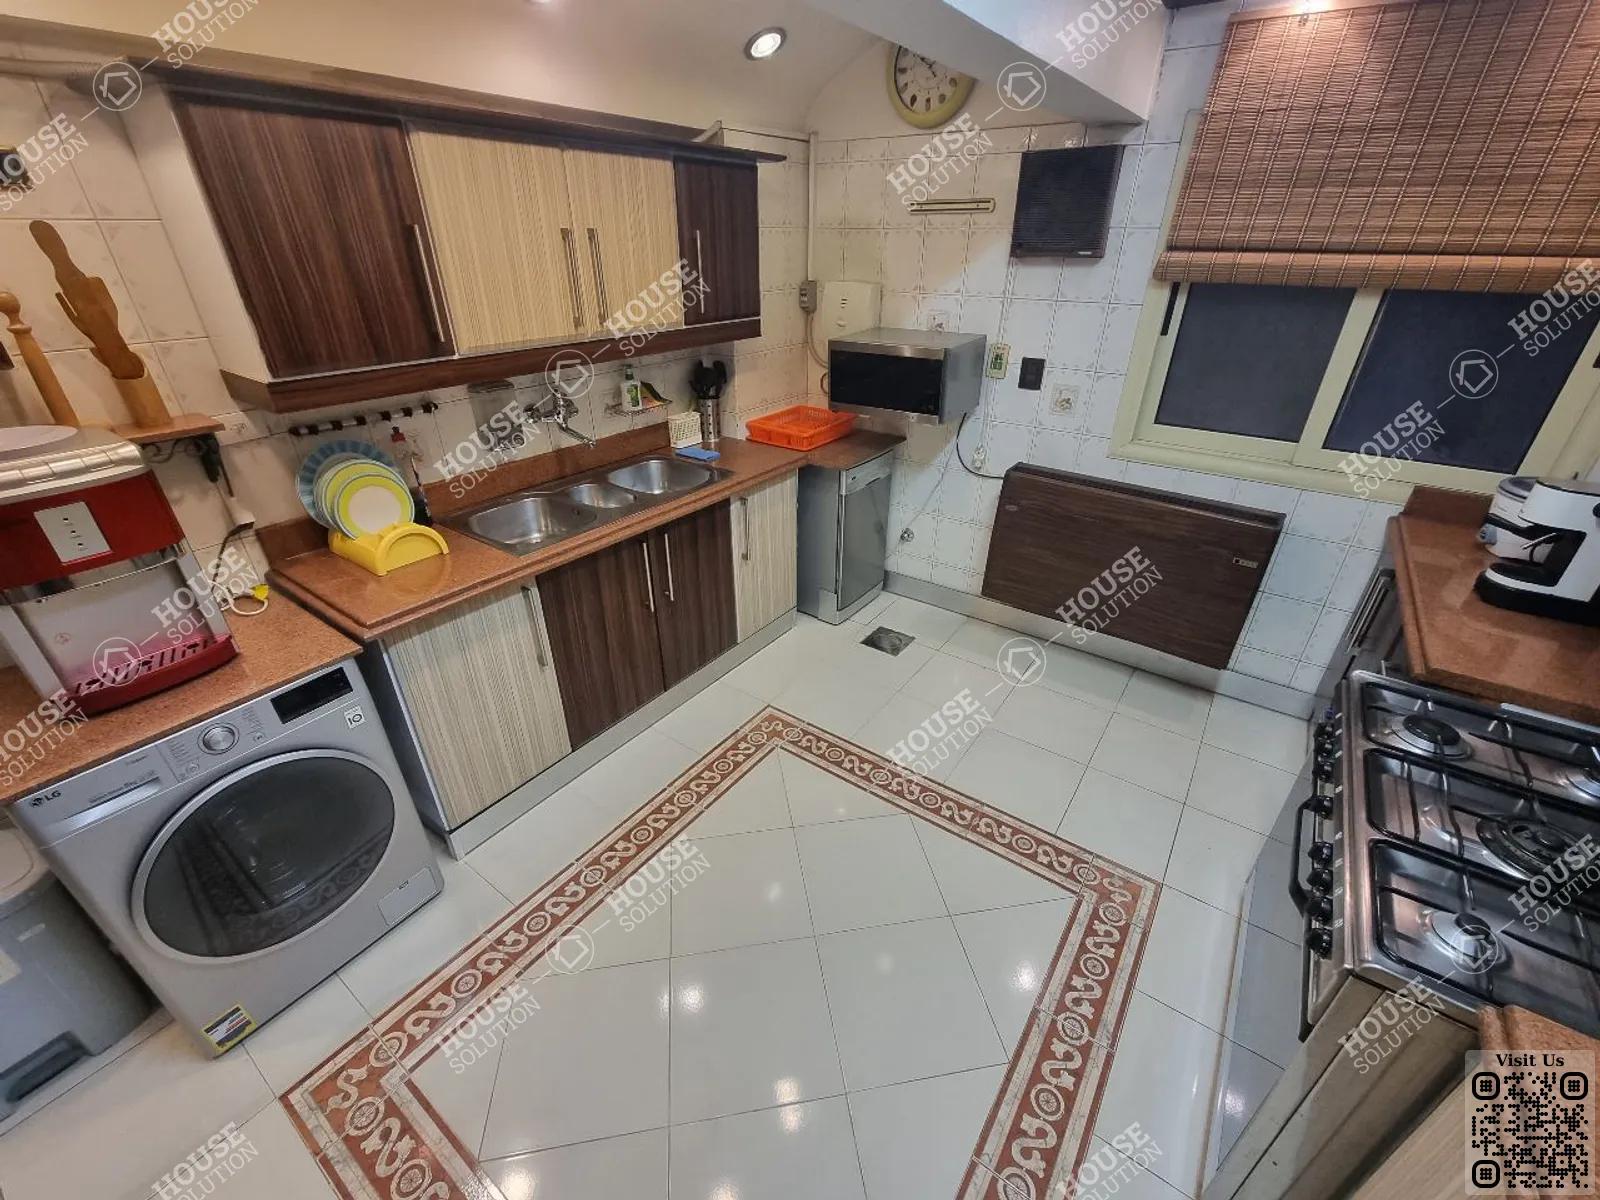 KITCHEN  @ Apartments For Rent In Maadi Maadi Sarayat Area: 200 m² consists of 3 Bedrooms 2 Bathrooms Furnished 5 stars #3848-2